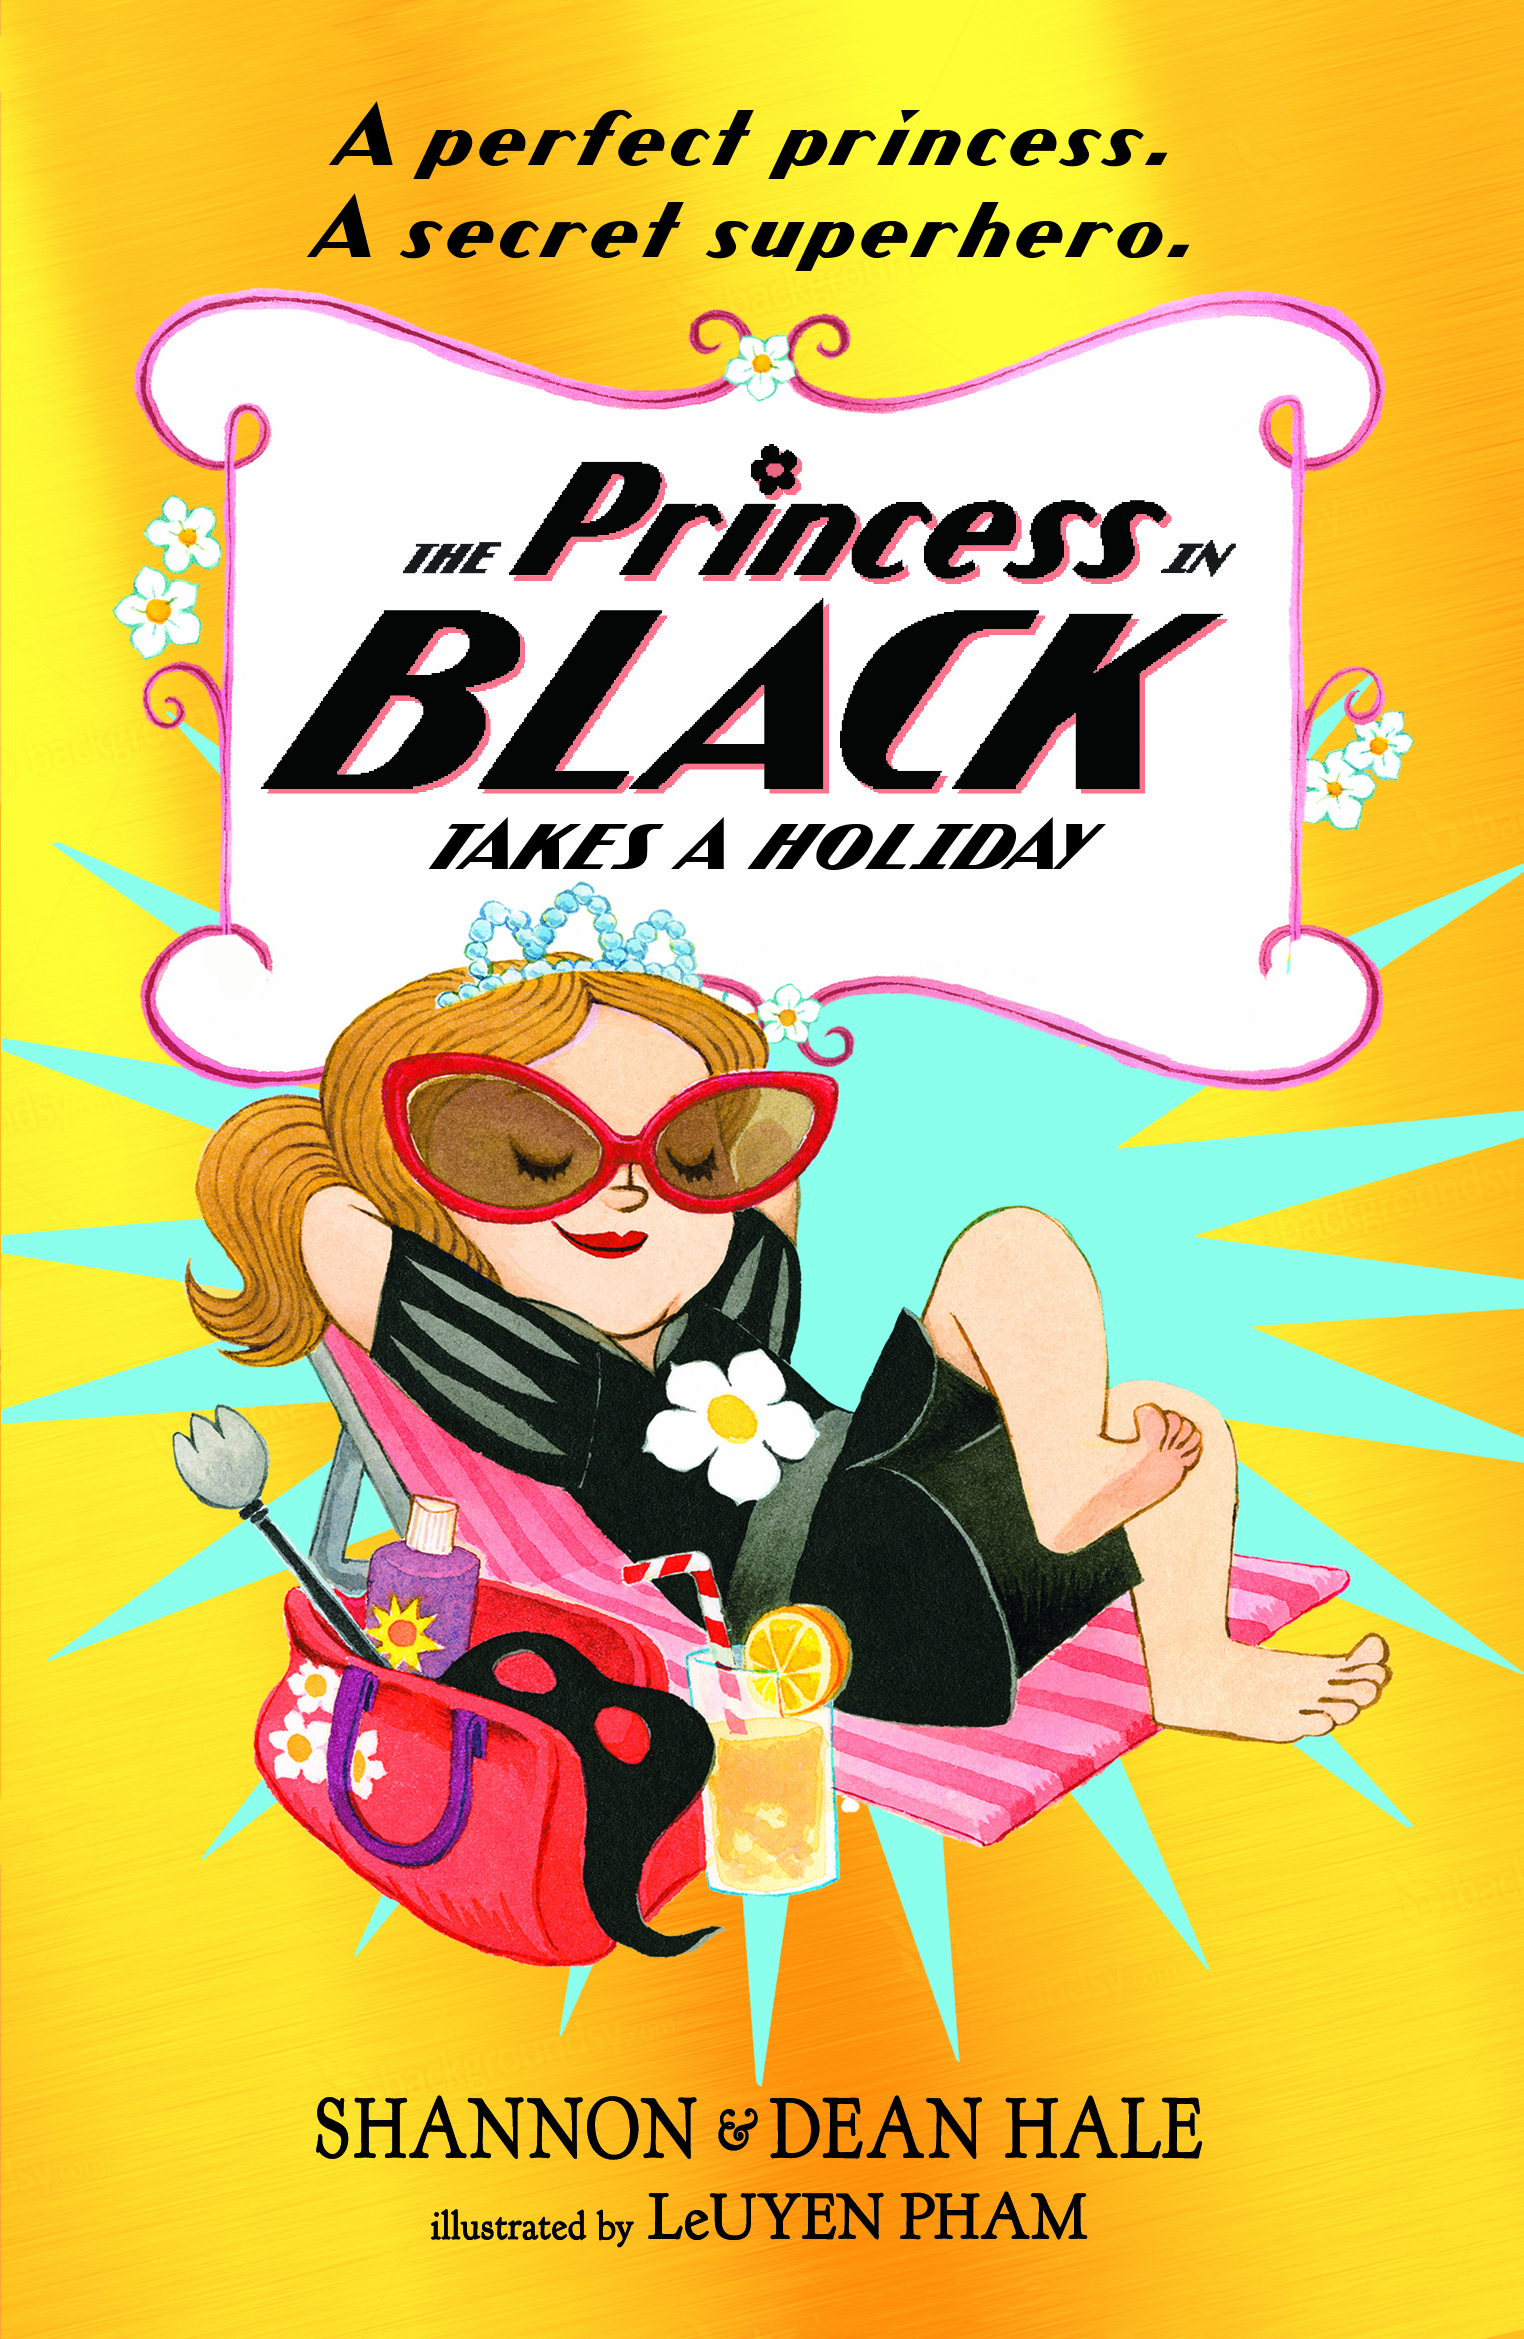 The-Princess-in-Black-Takes-a-Holiday